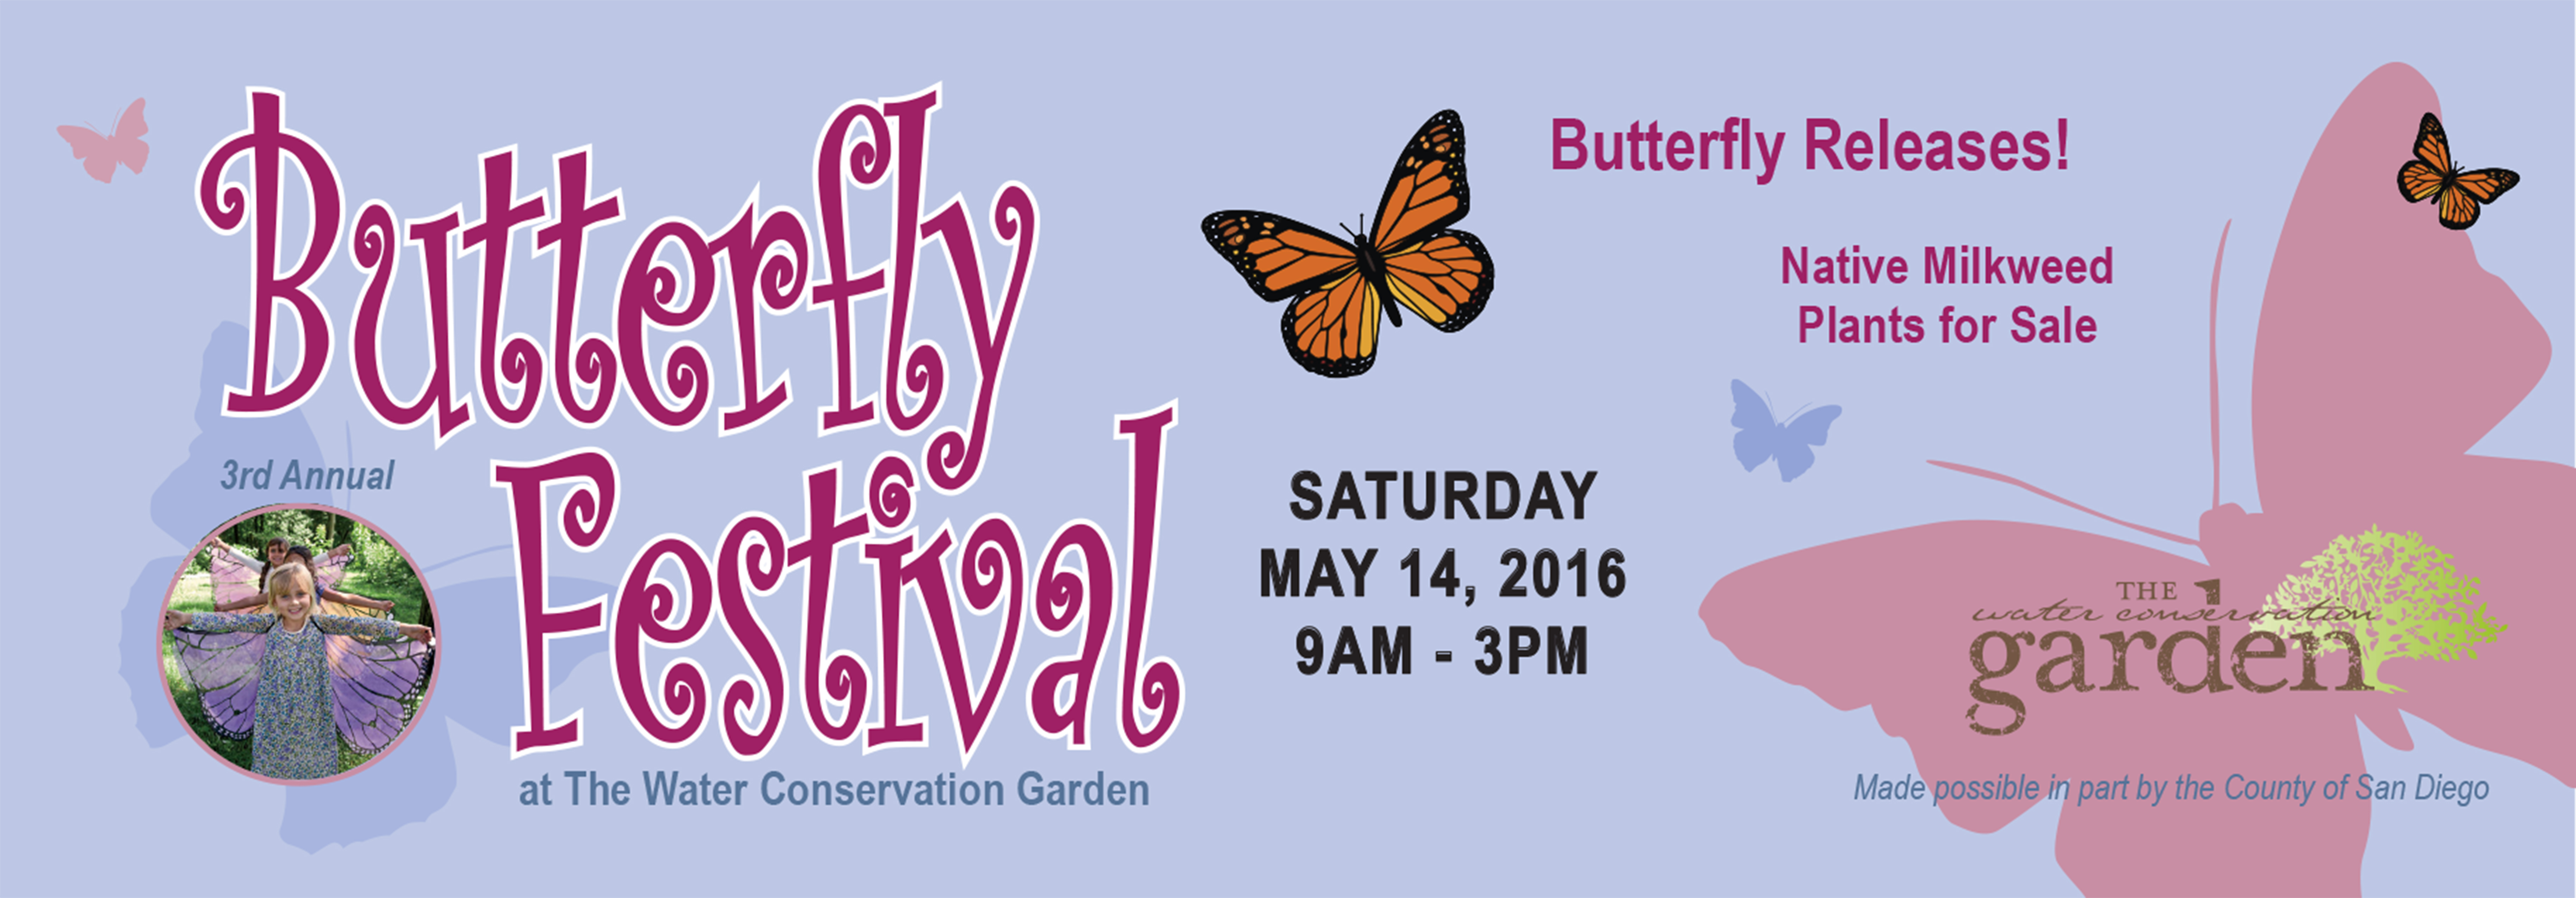 Butterfly Festival | The Water Conservation Garden The Water ...